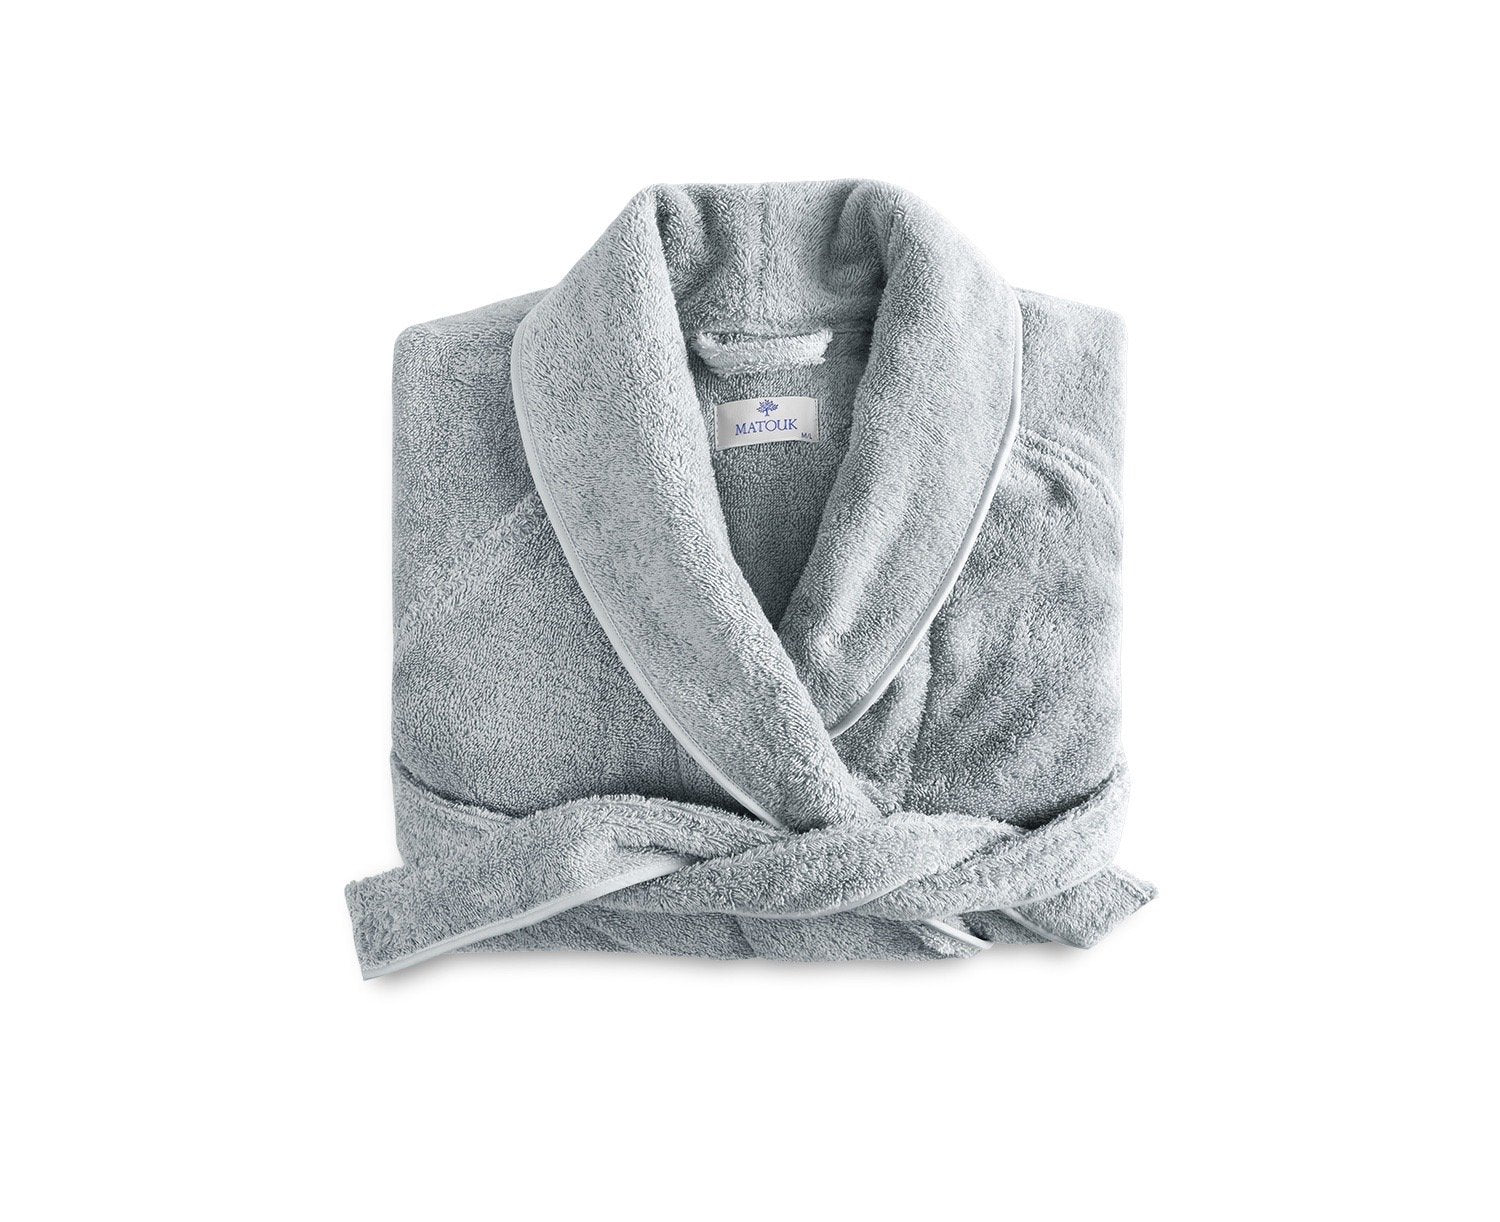 Cairo Robe in White with Azure | Matouk Robes at Fig Linens and Home